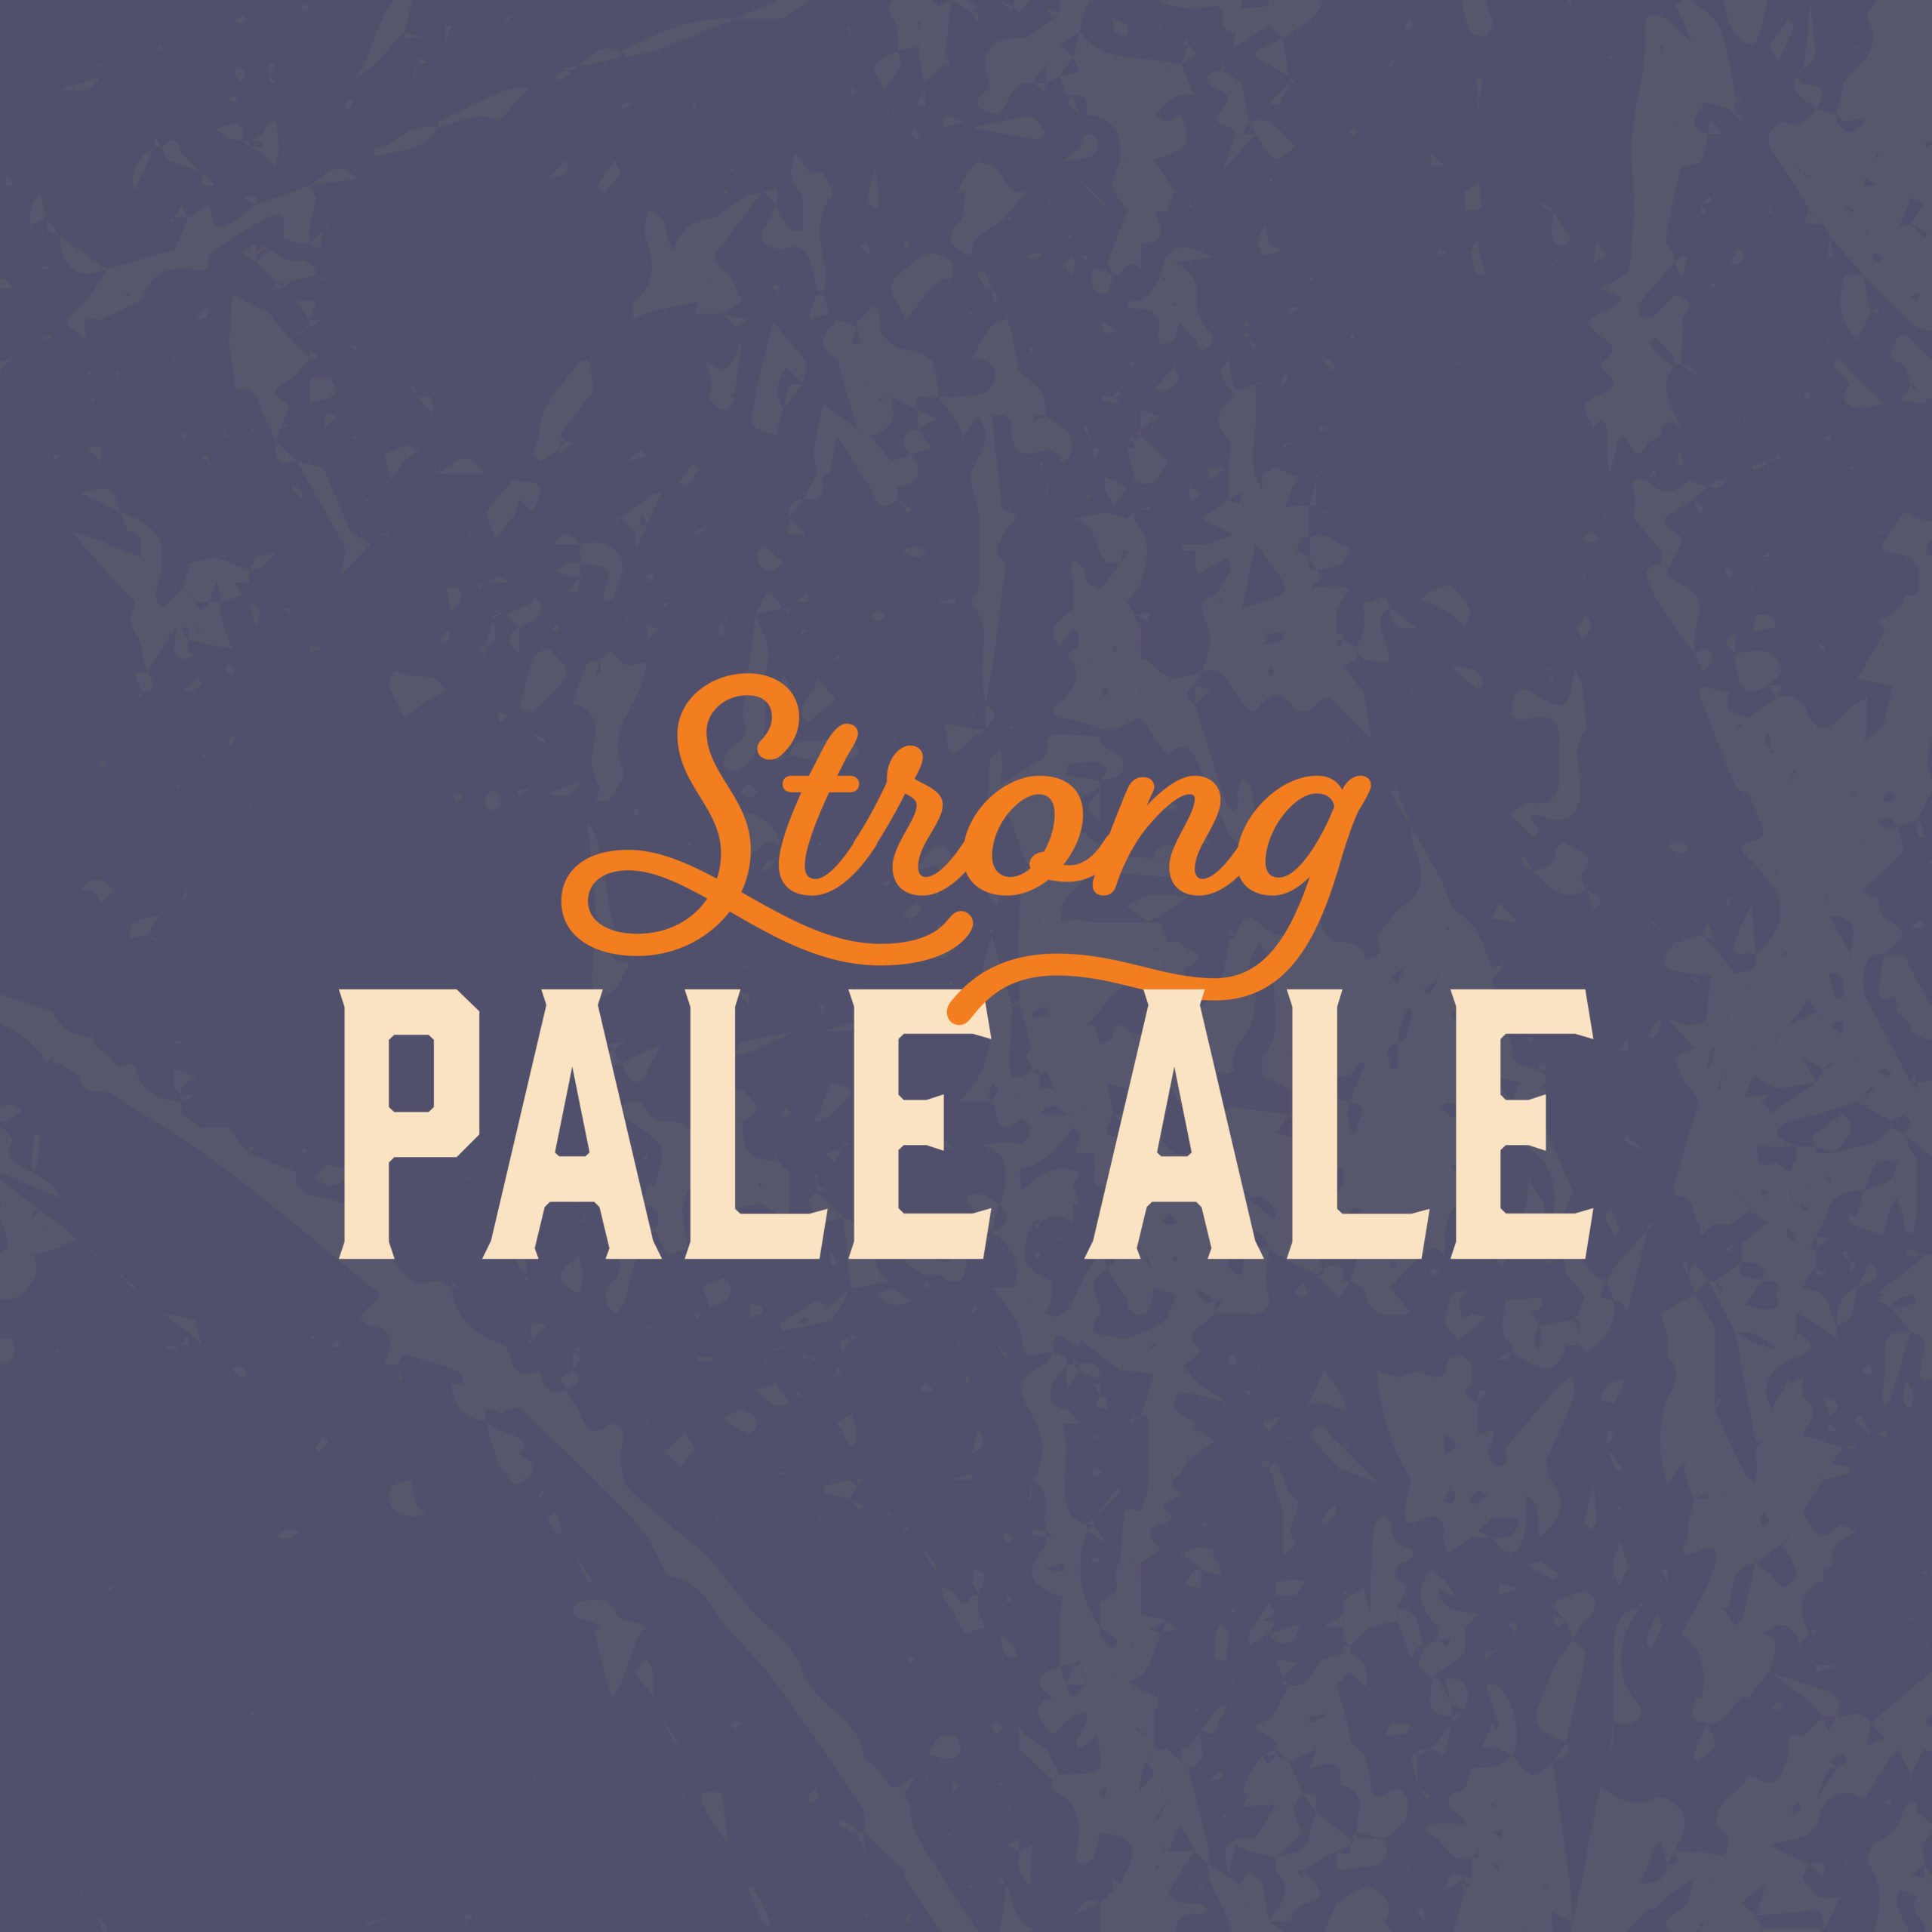 STRONG PALE ALE